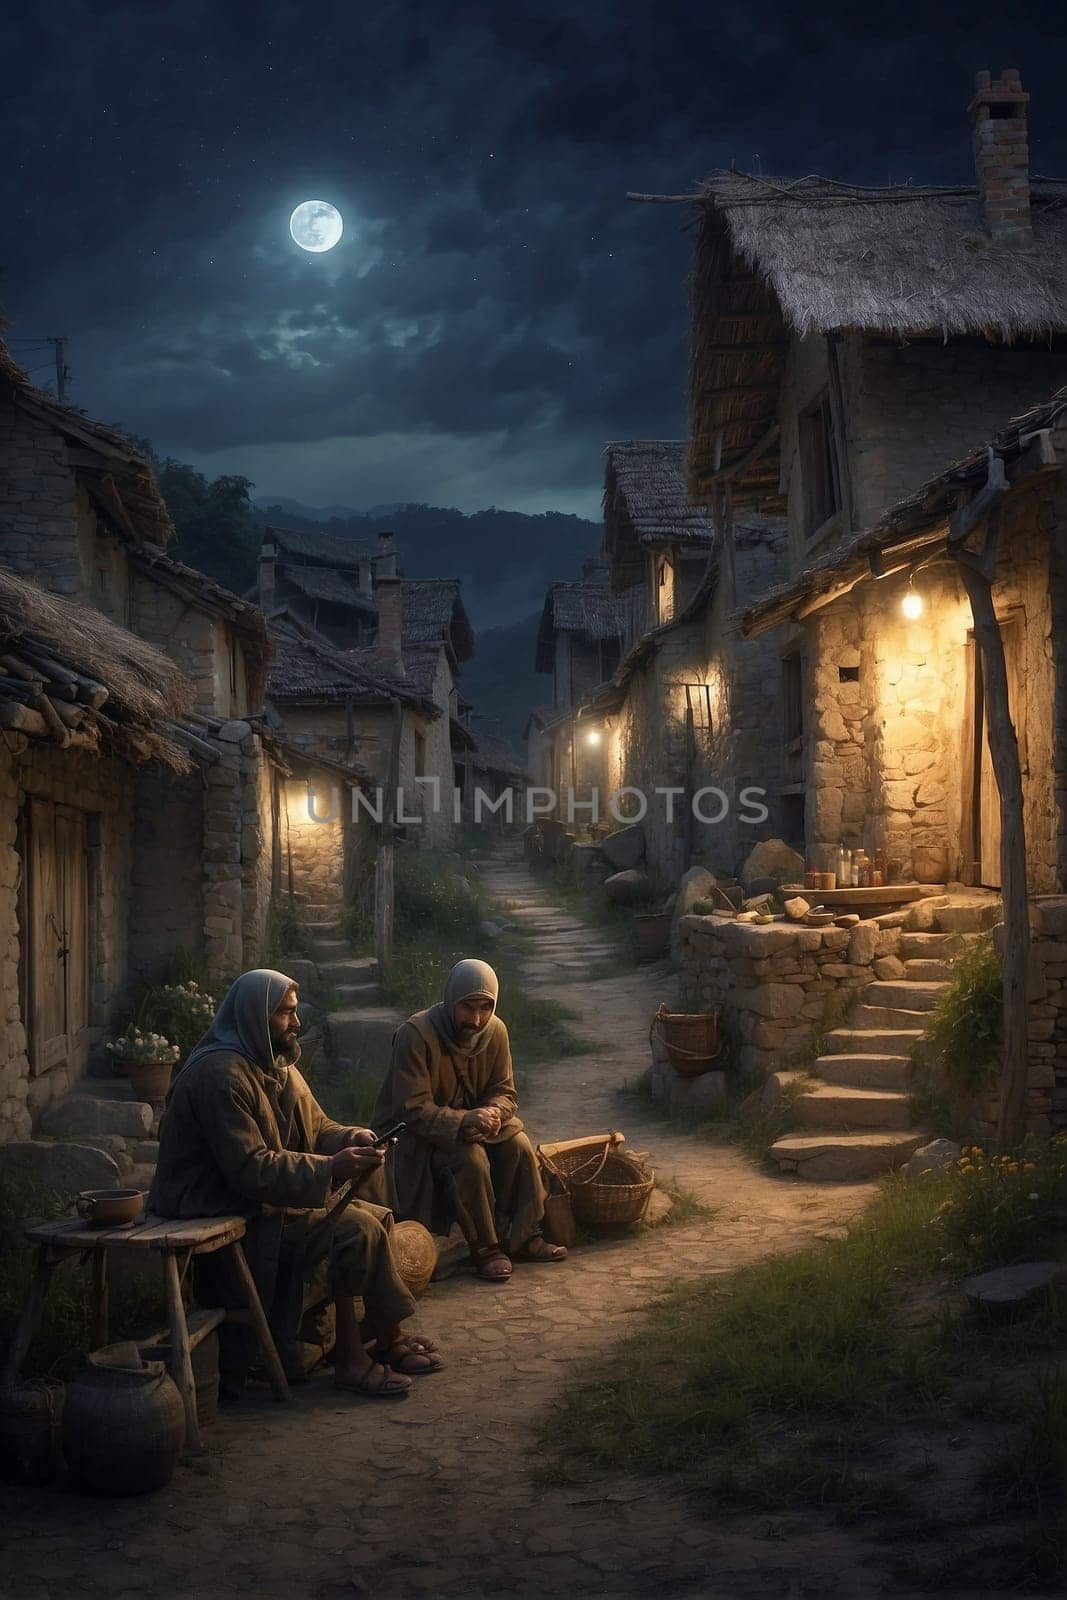 An art piece depicting two individuals comfortably seated on a cobblestone street.